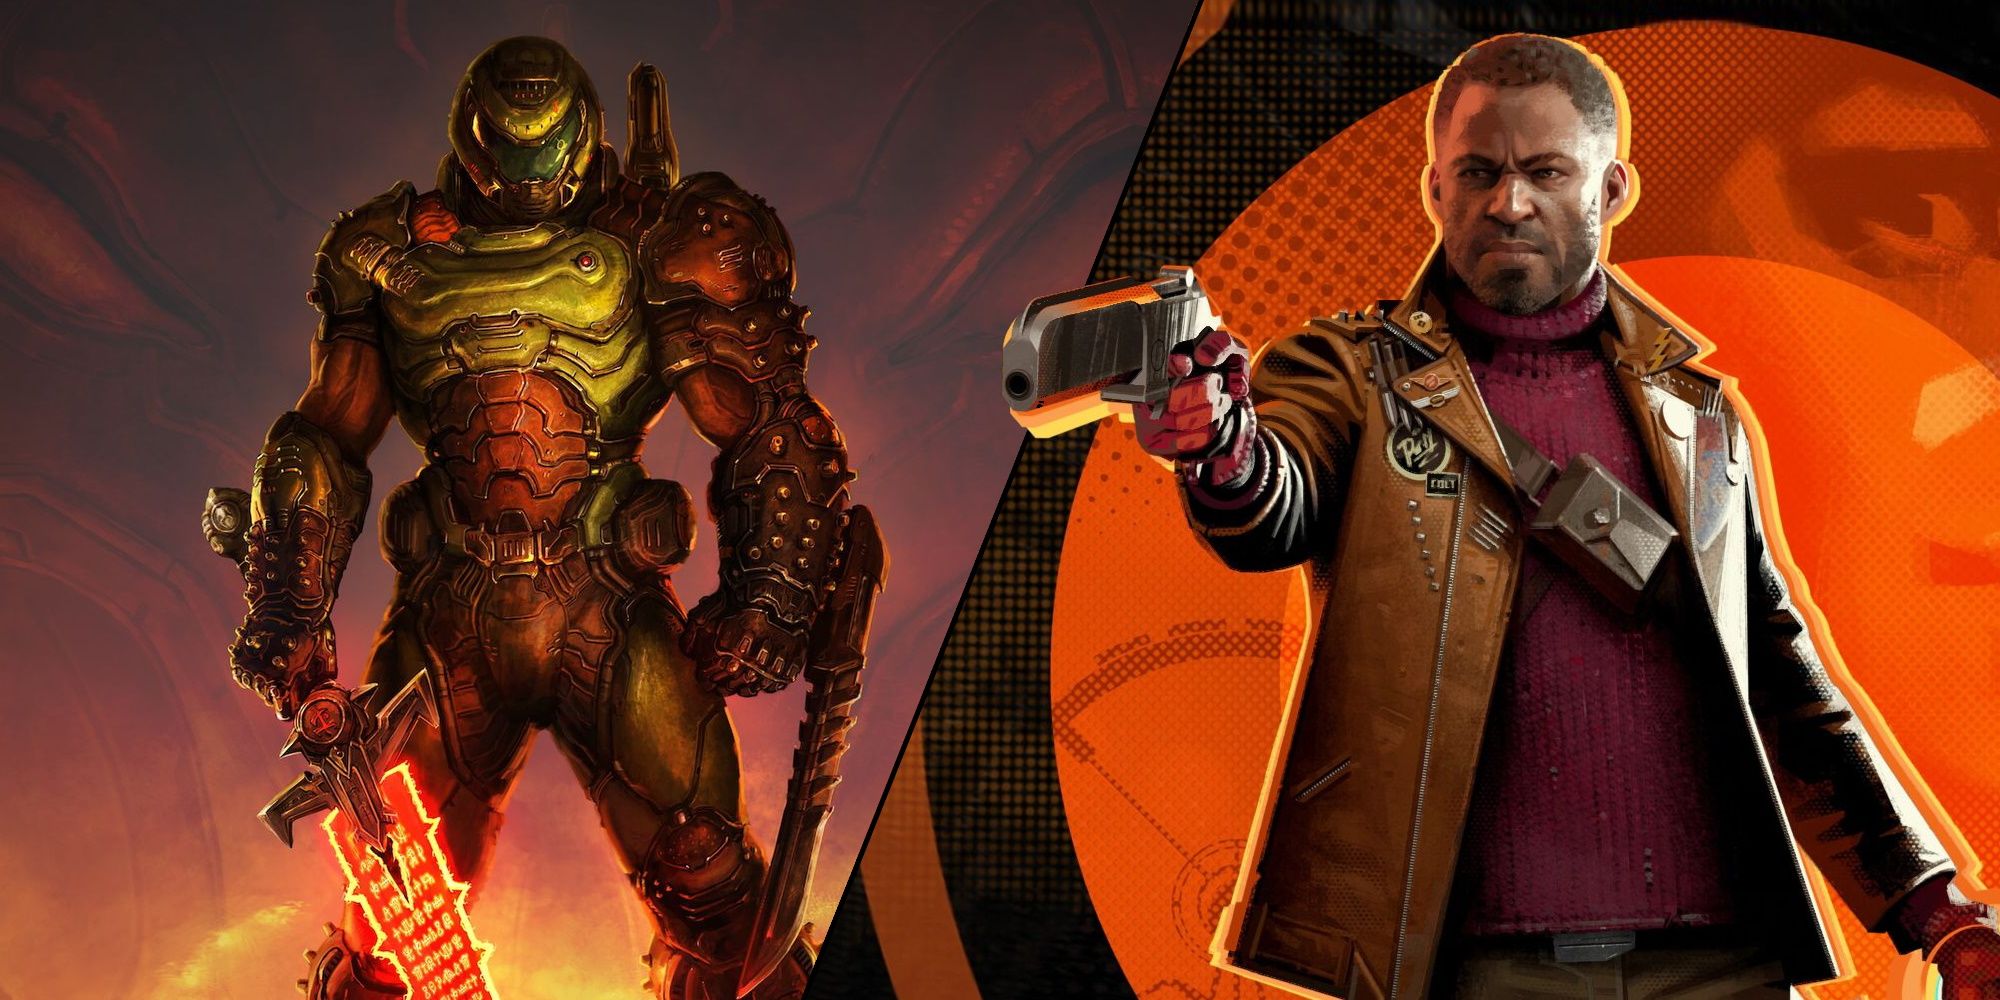 Split image featuring the Doom Slayer from Doom Eternal and Colt from Deathloop